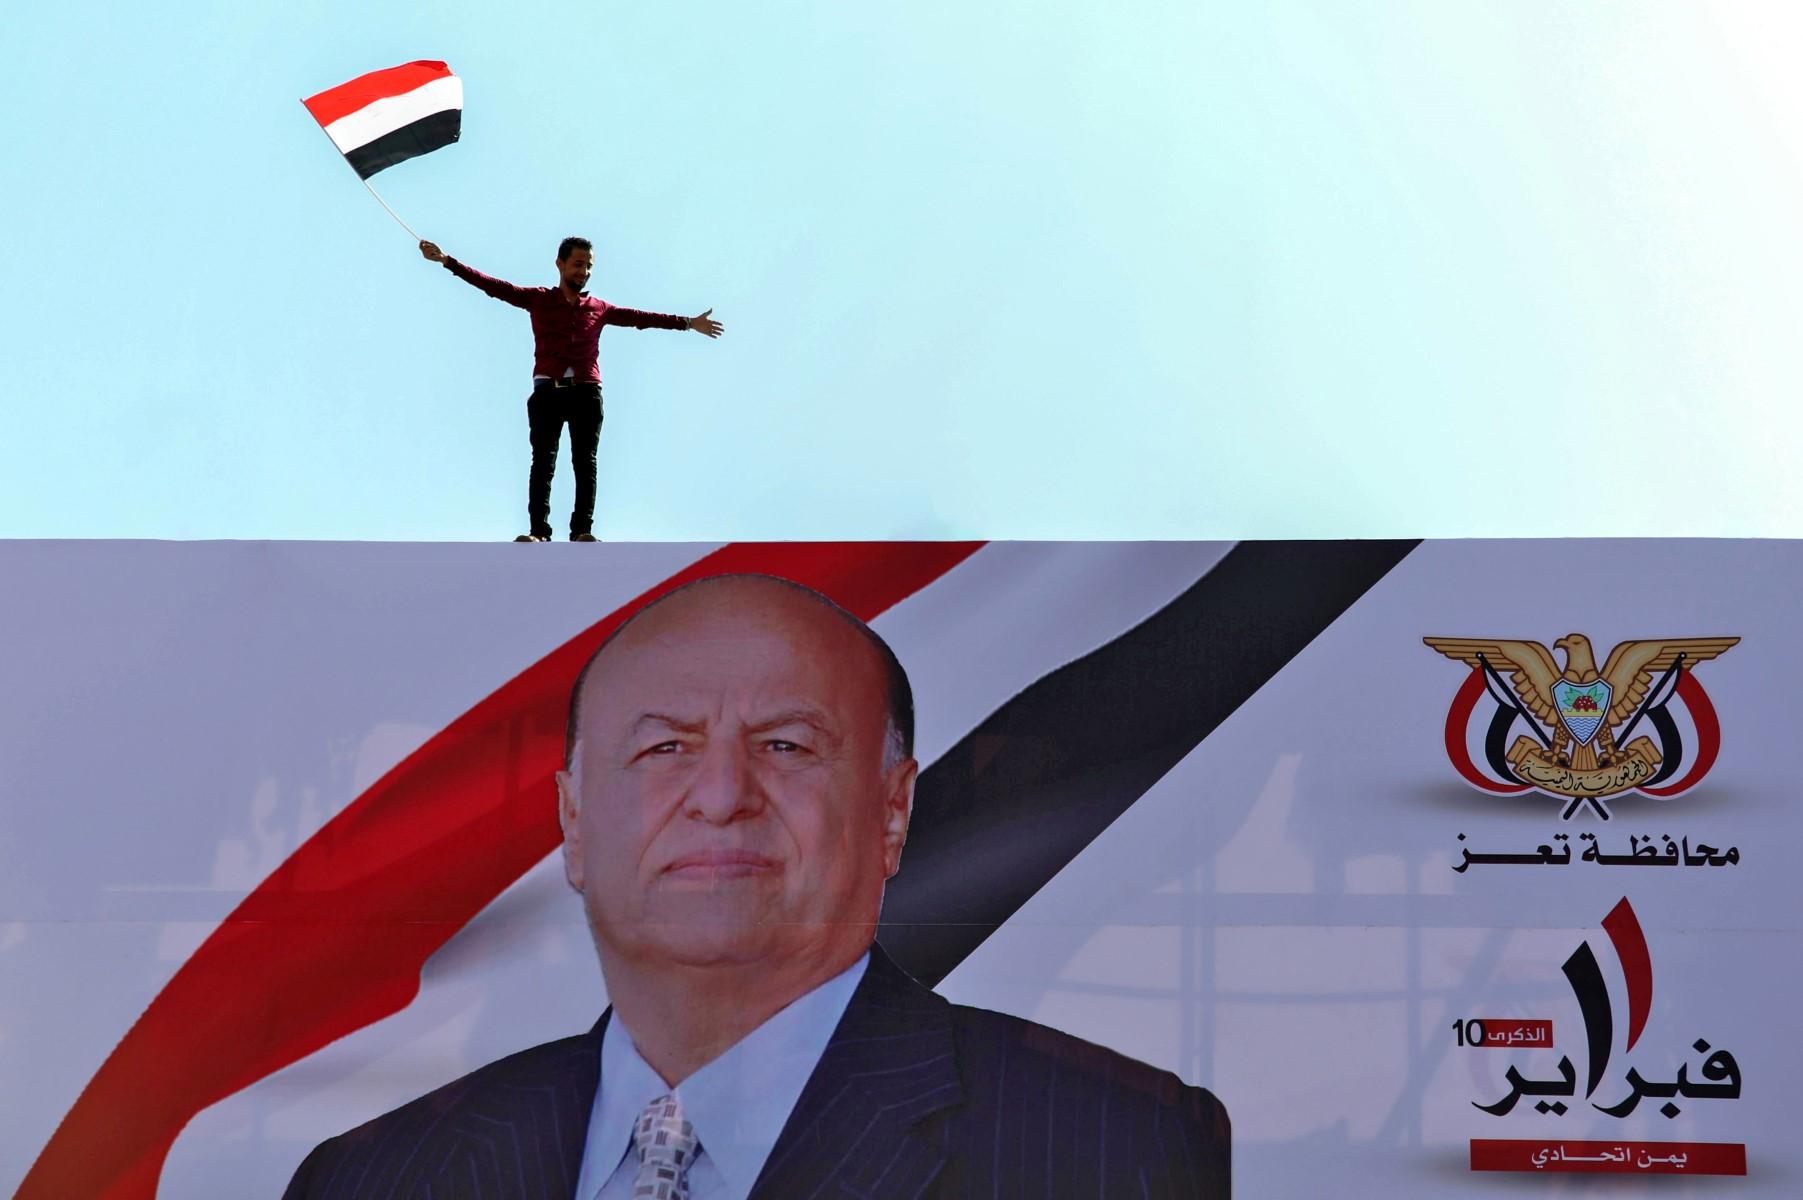 A Yemeni youth waves a national flag atop a billboard showing Yemen's President Abedrabbo Mansour Hadi during a rally commemorating the 10th anniversary of 2011 Arab Spring uprising, in Yemen's third city of Taez on Feb 11, 2021. Photo: AFP